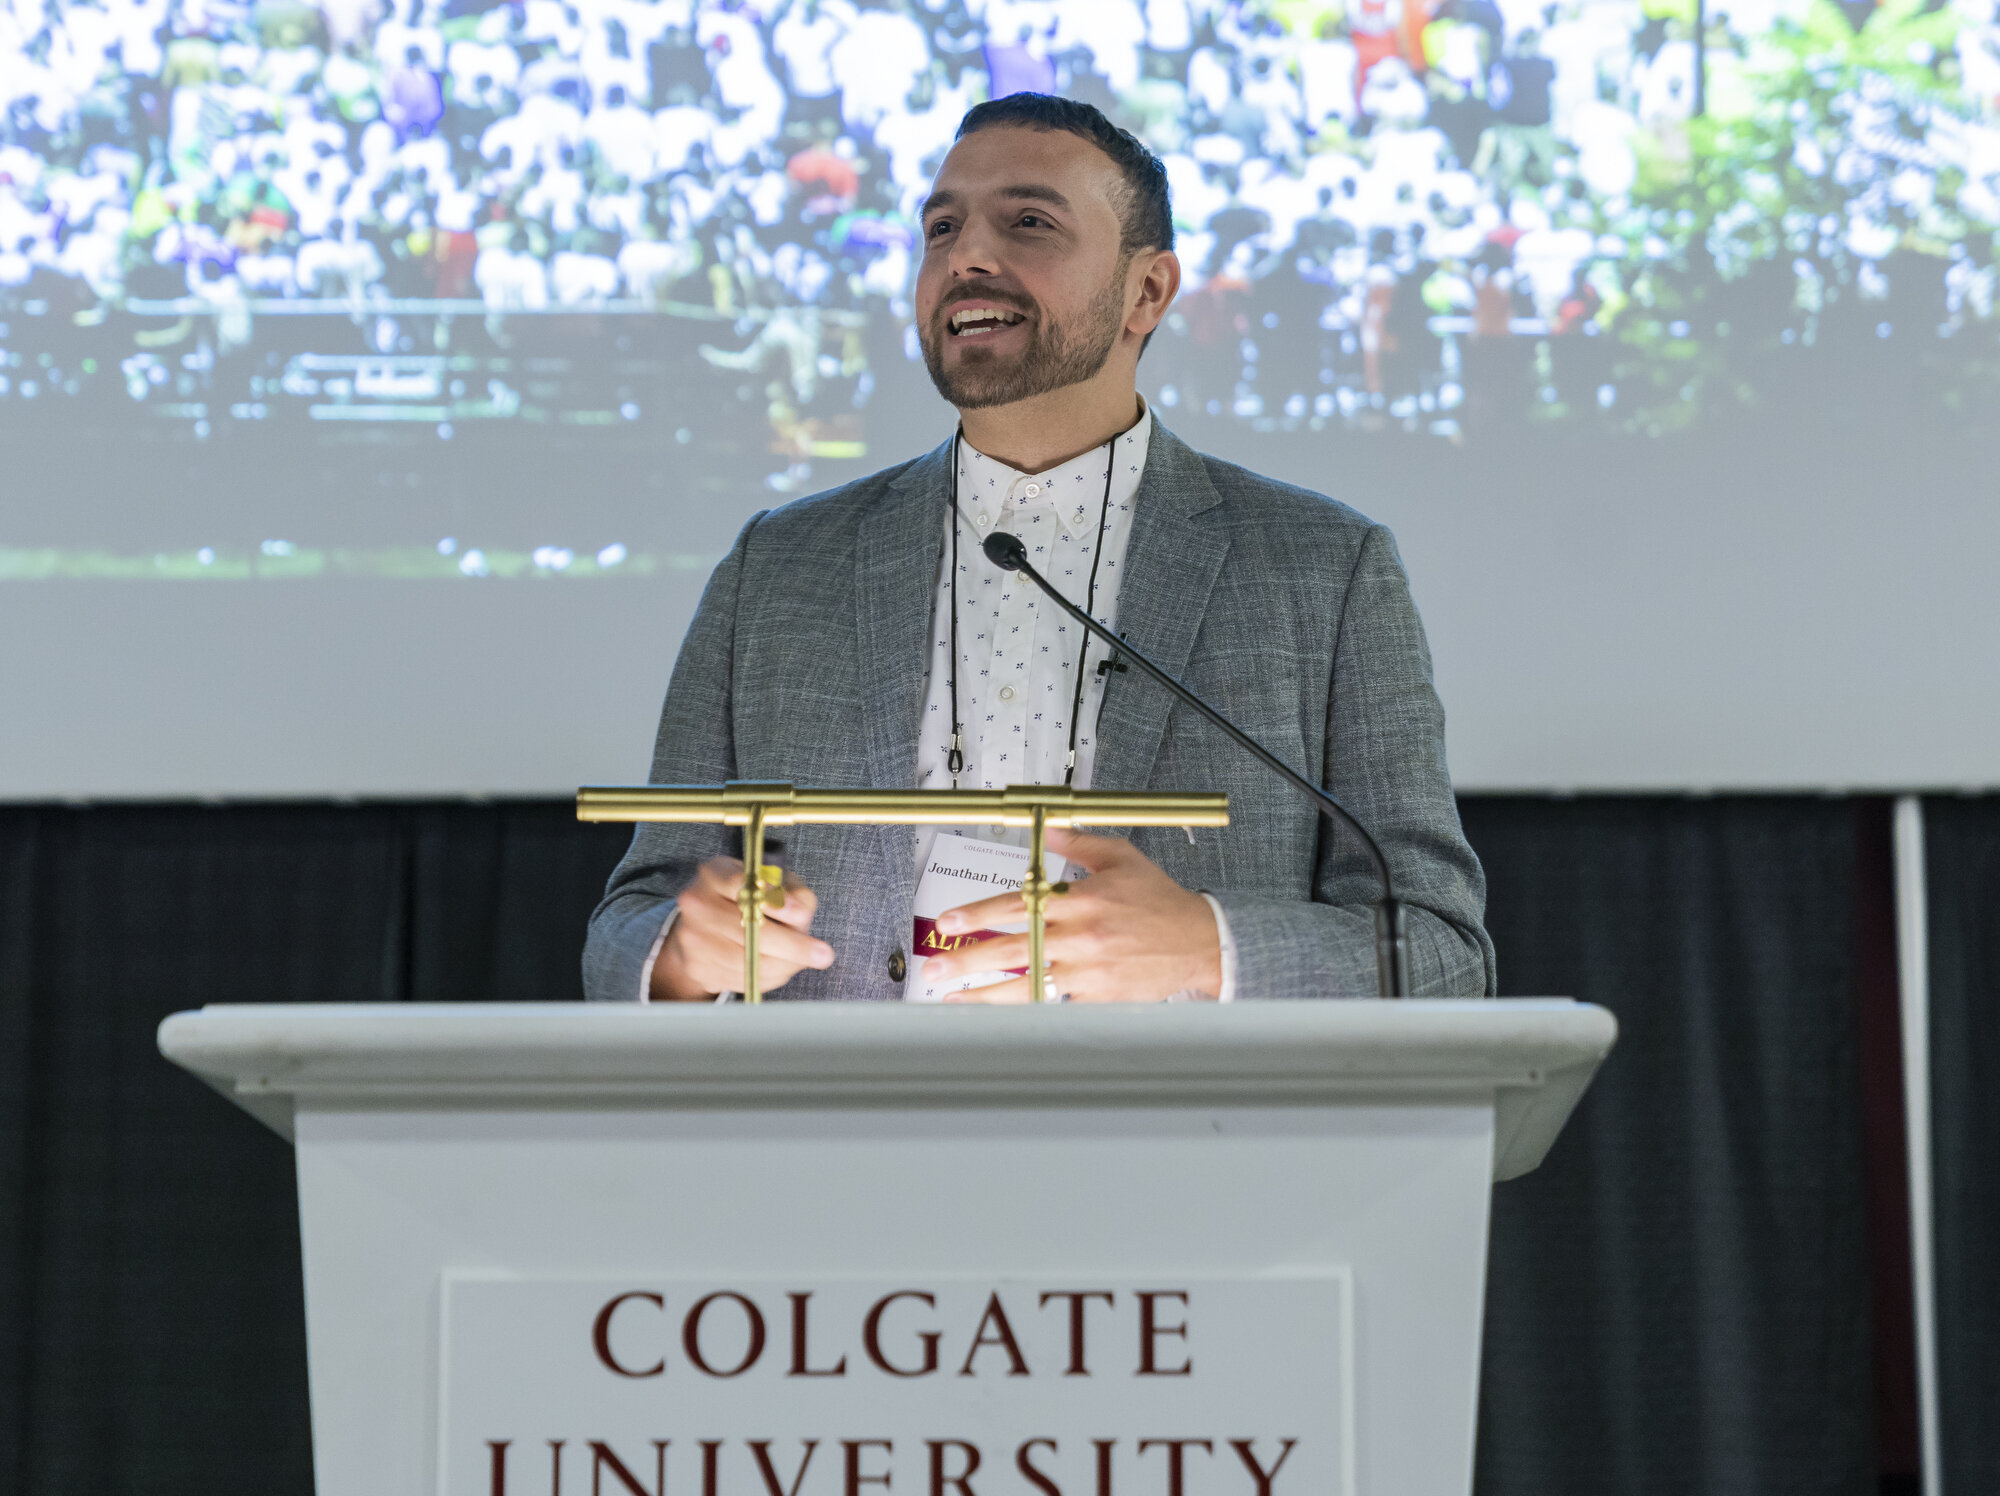  Jon Lopez '06, freelance sports photographer and cinematographer is the keynote speaker during SophoMORE Connections in the Huntington Gymnasium Jaunary 17, 2020. 